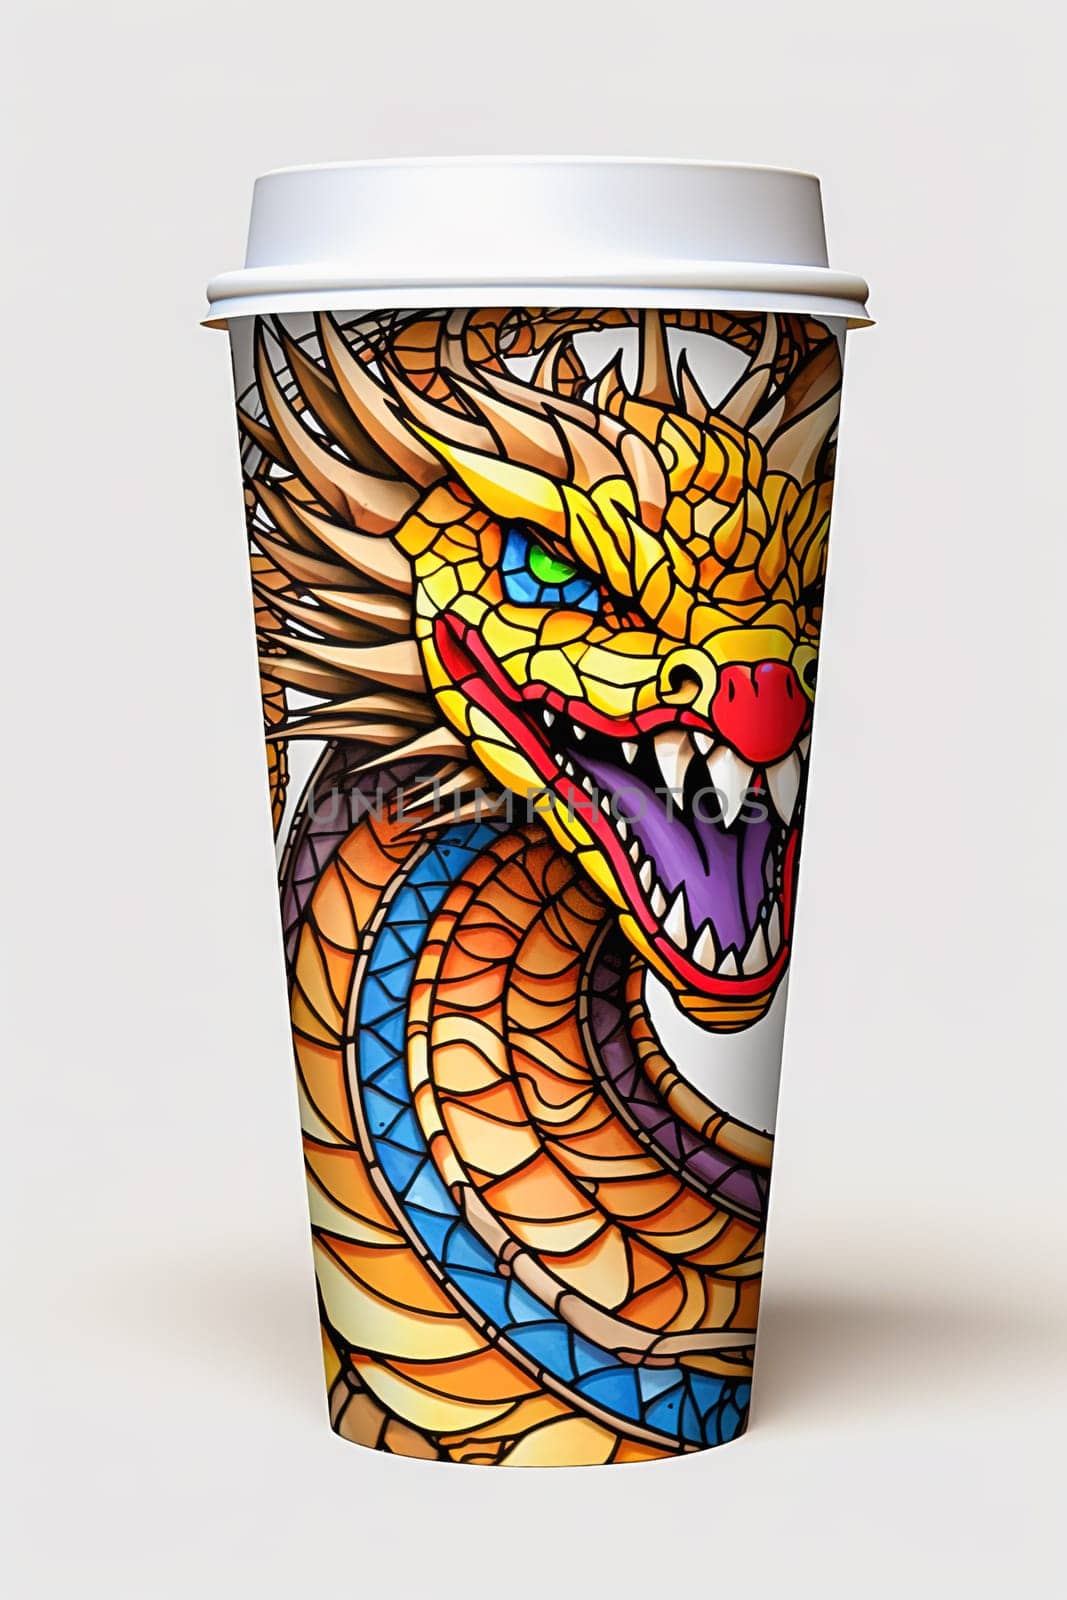 A paper coffee cup with an image of a dragon, the symbol of the year. High quality illustration